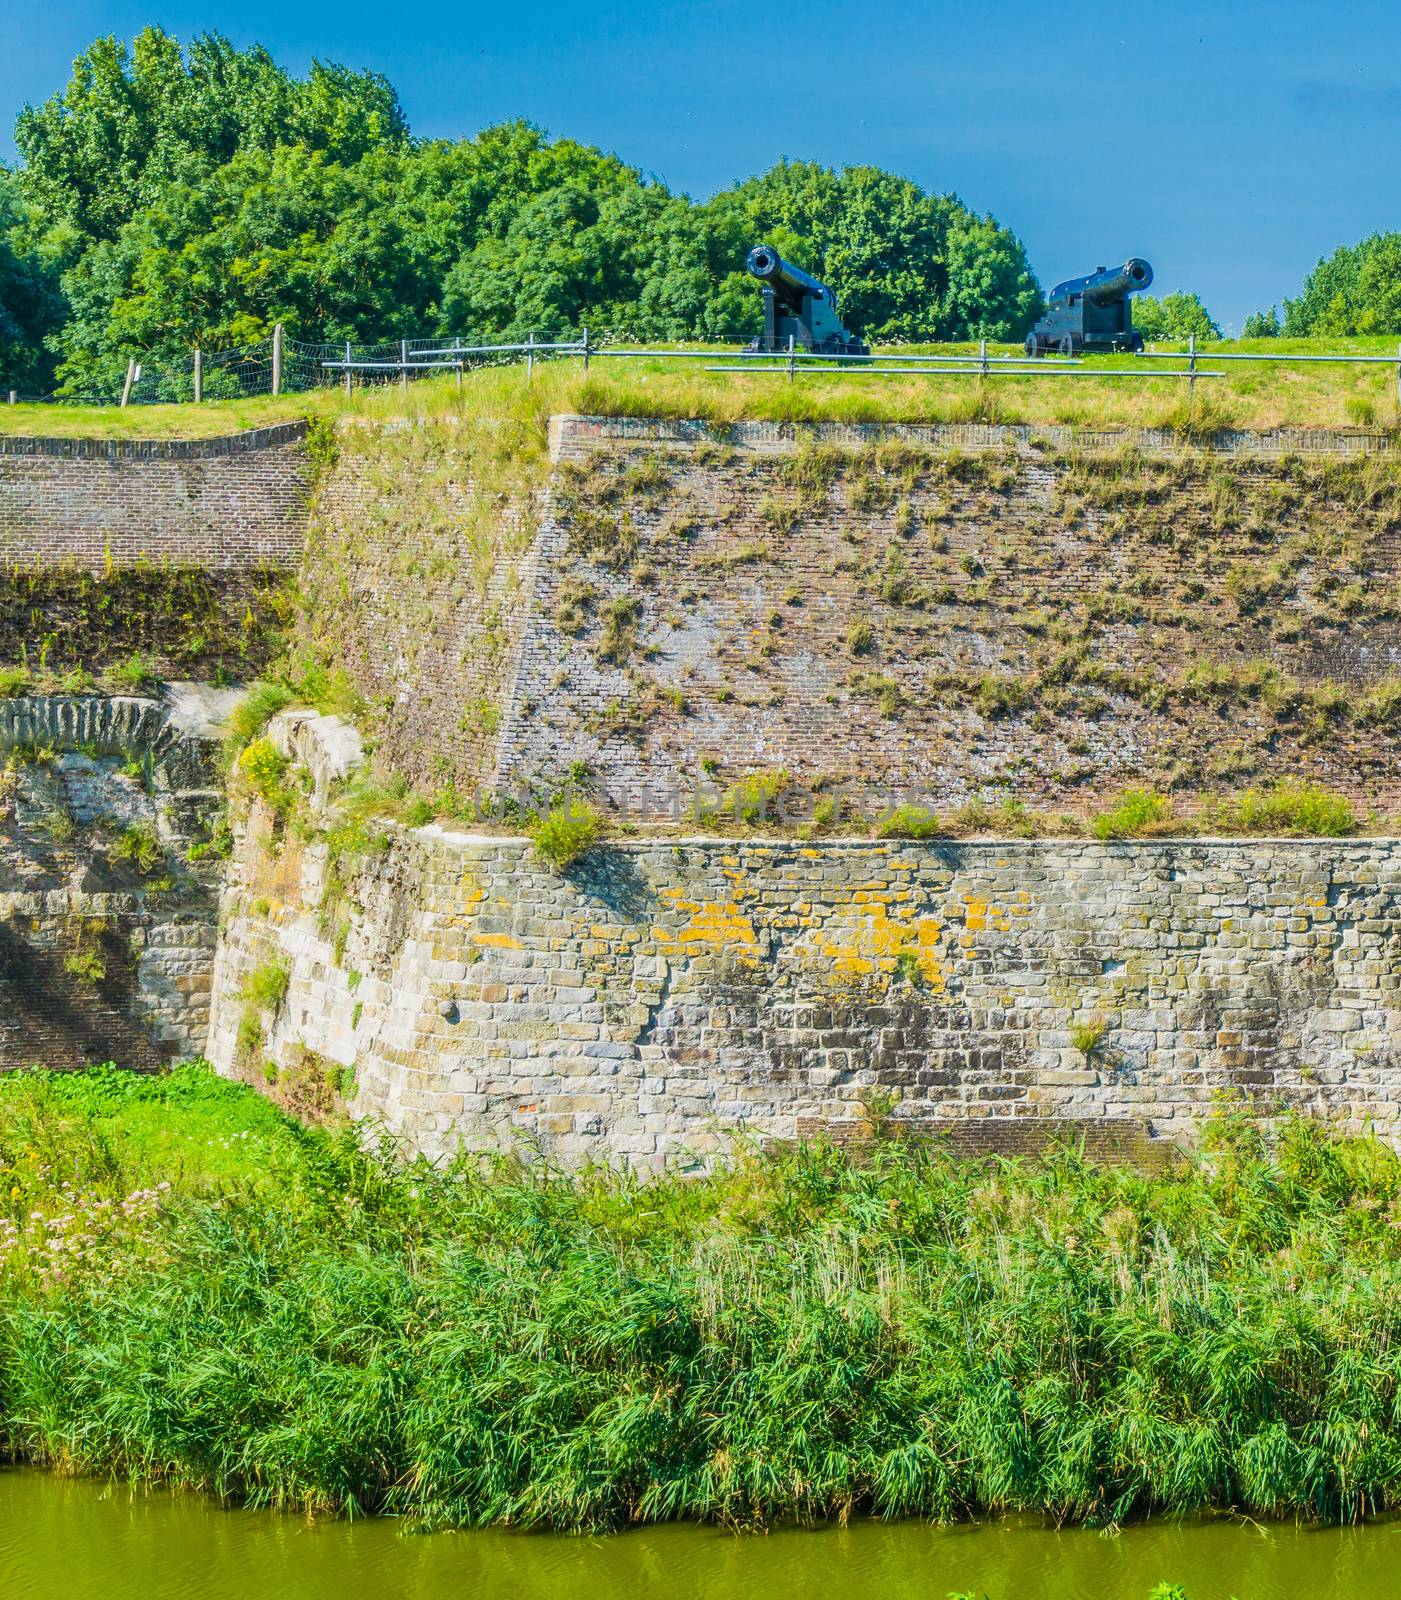 massive old stone defense wall with cannons